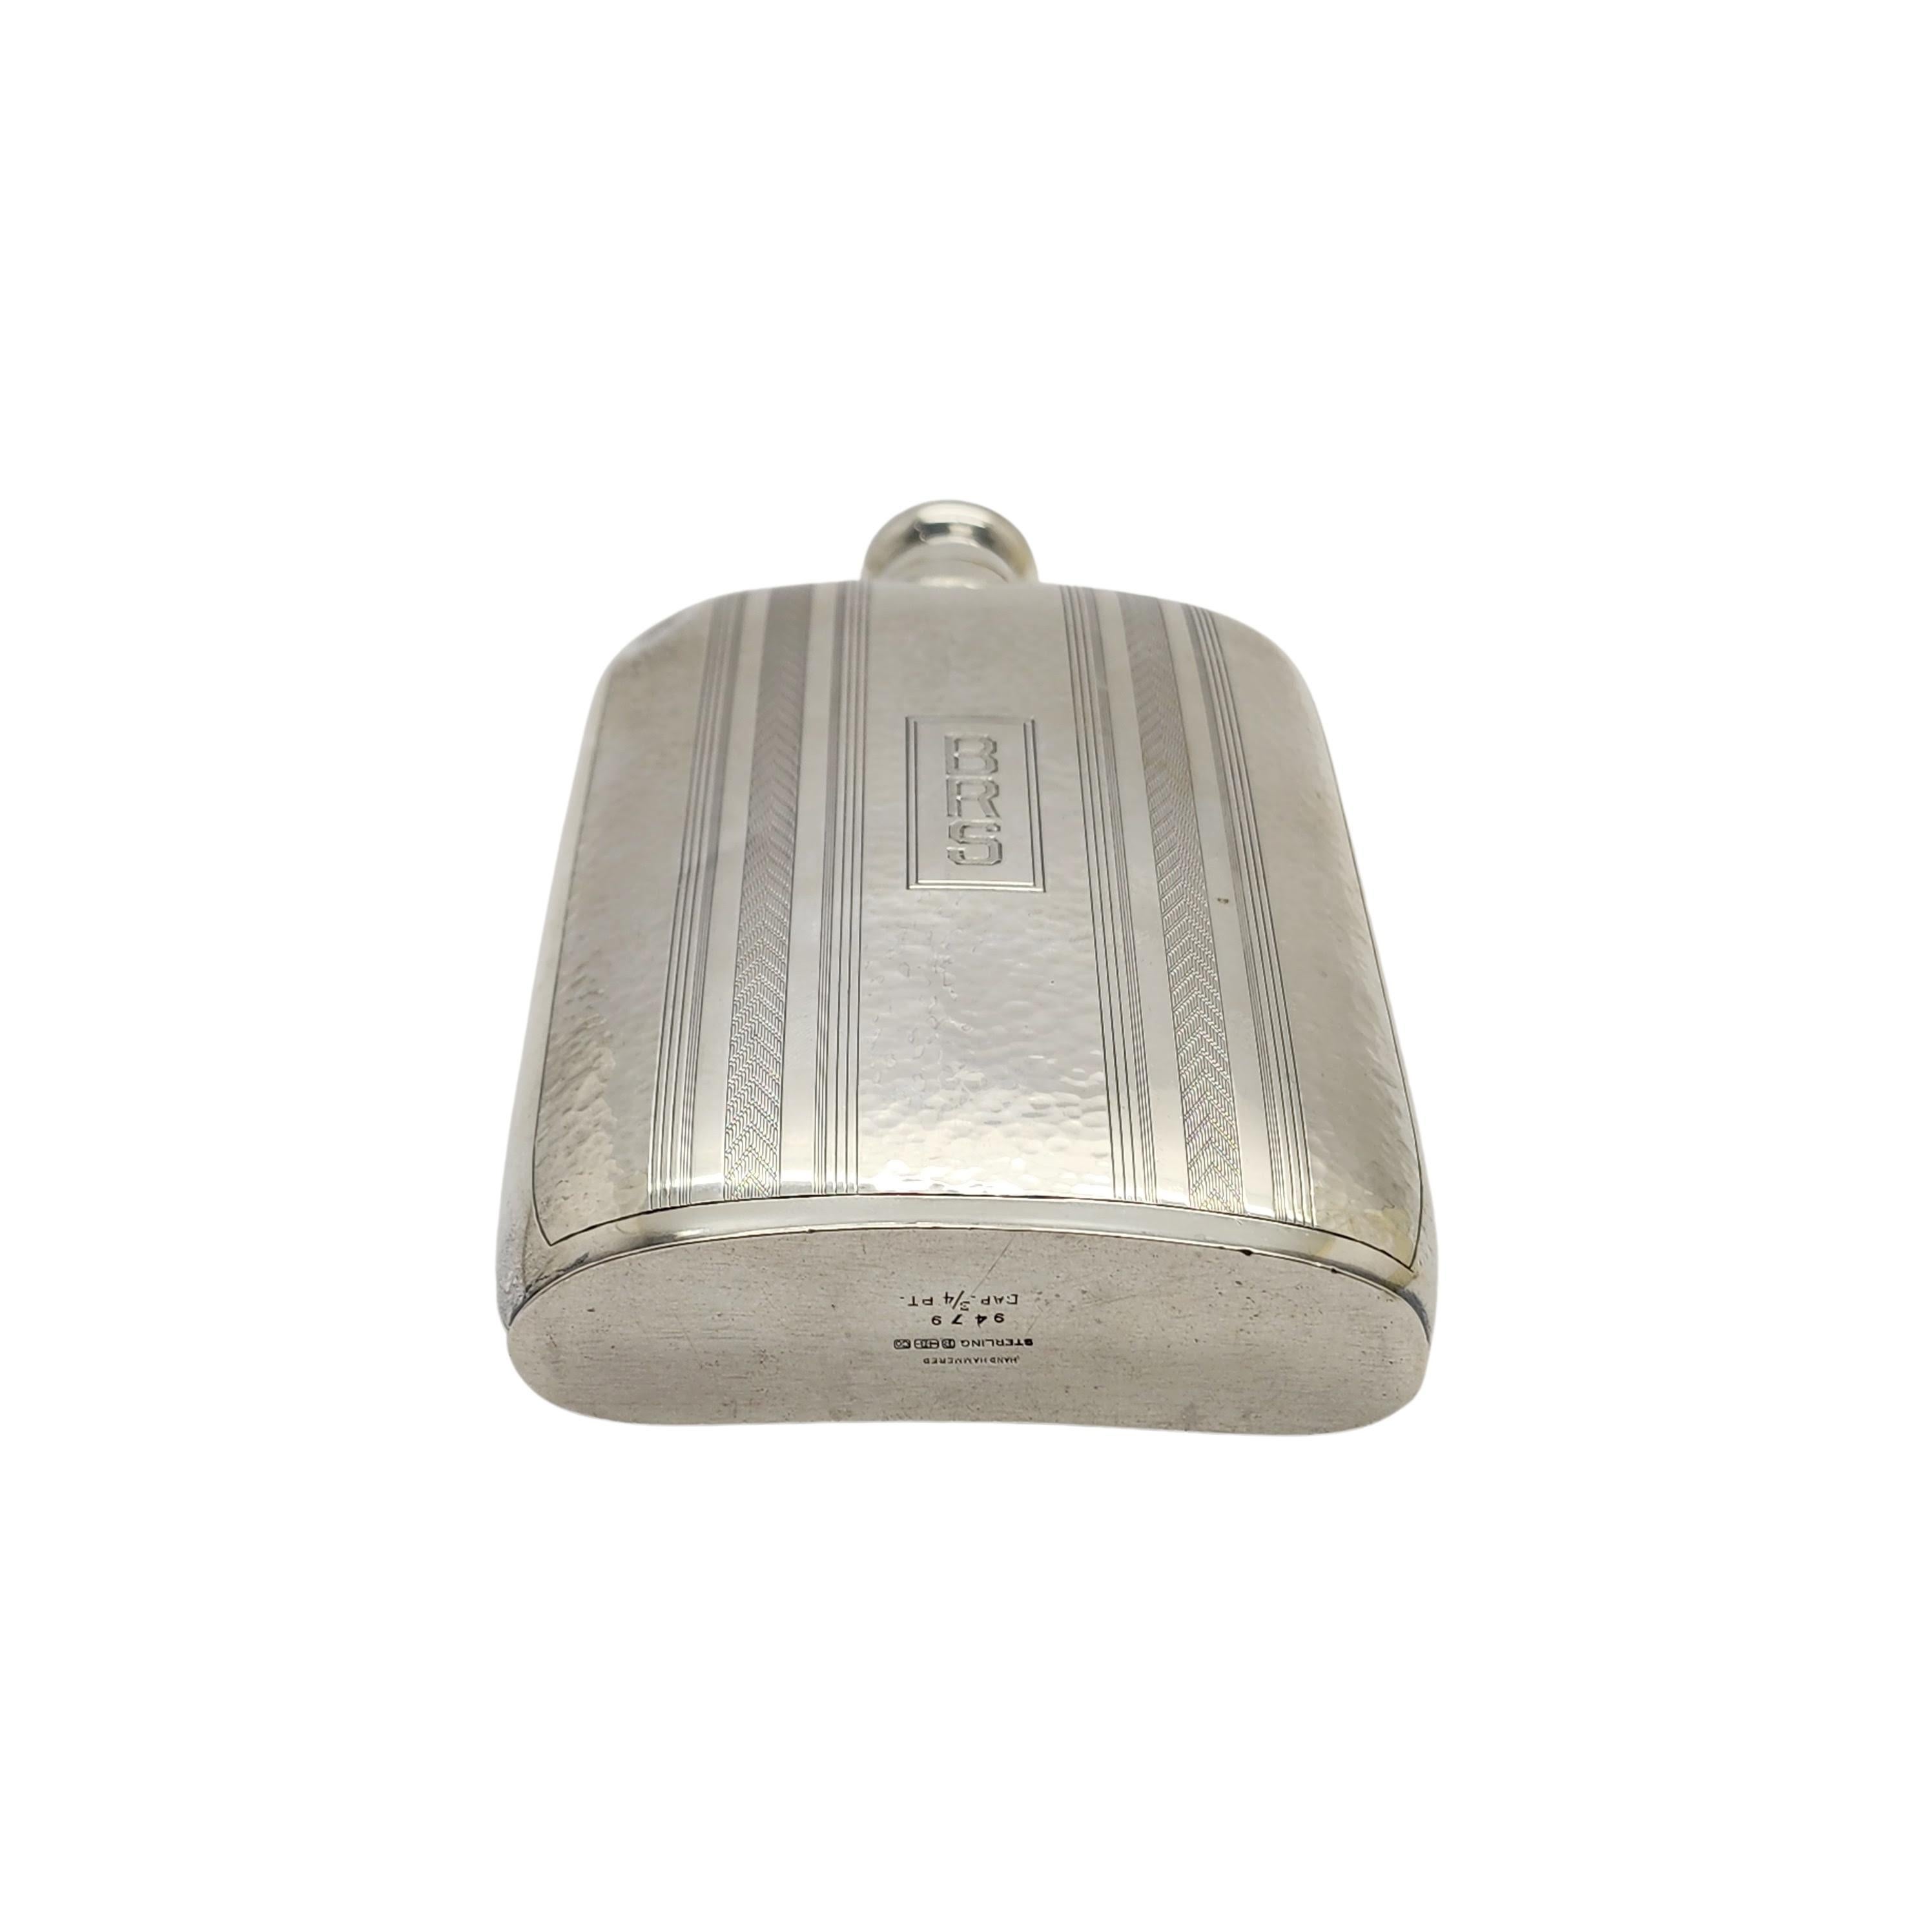 sterling silver flask for sale